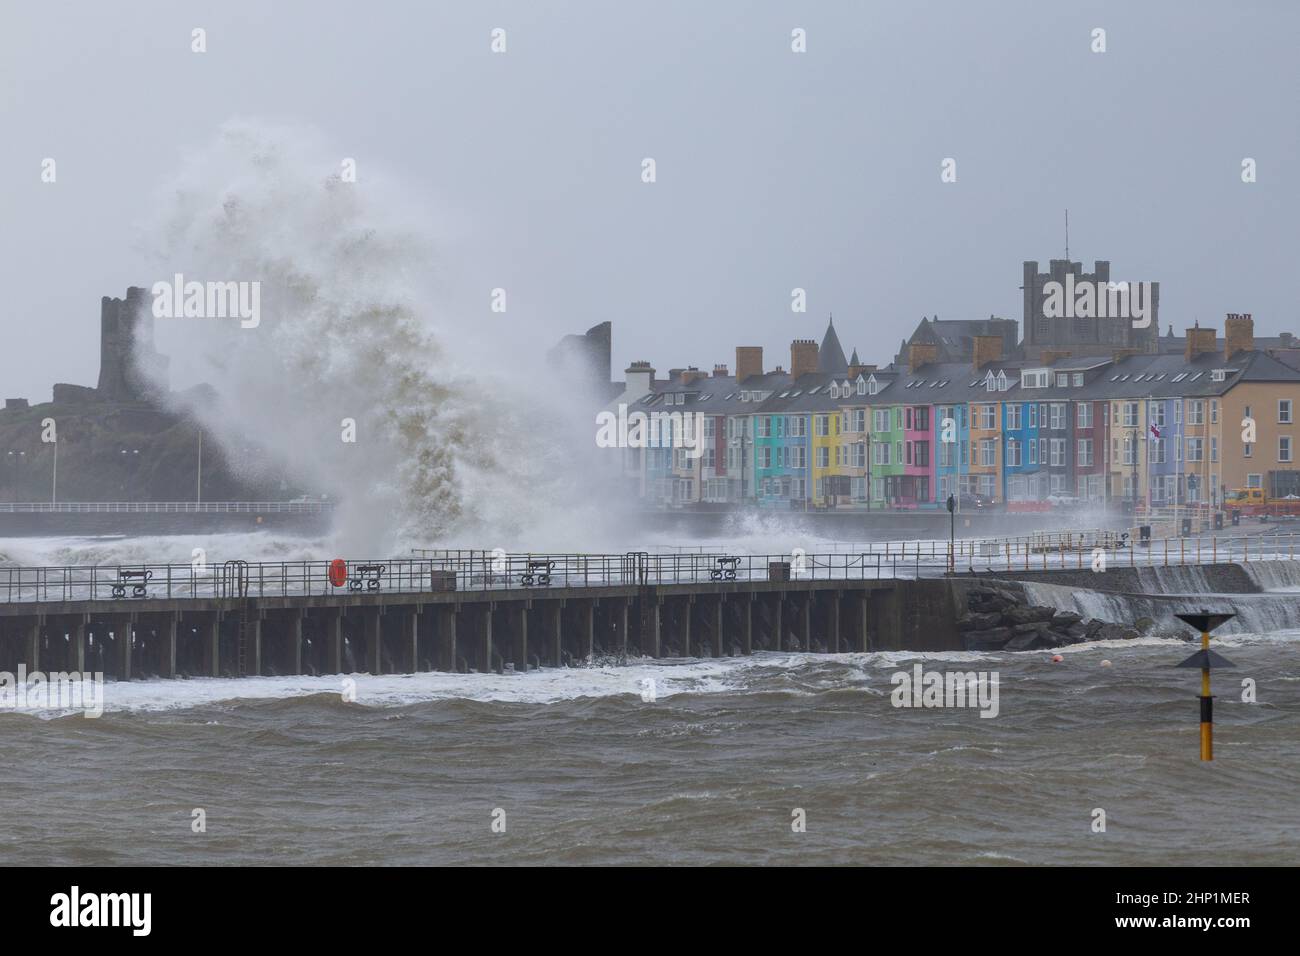 Aberystwyth, UK. 18th Feb, 2022. 18 February 2022, Aberystwyth, Wales, UK. Storm Eunice. Gale force winds cause very rough seas at high tide on the mid Wales coast. Huge waves pummel the the promenade and sea defences at the mouth of Aberystwyth harbour. Credit: atgof.co/Alamy Live News Stock Photo